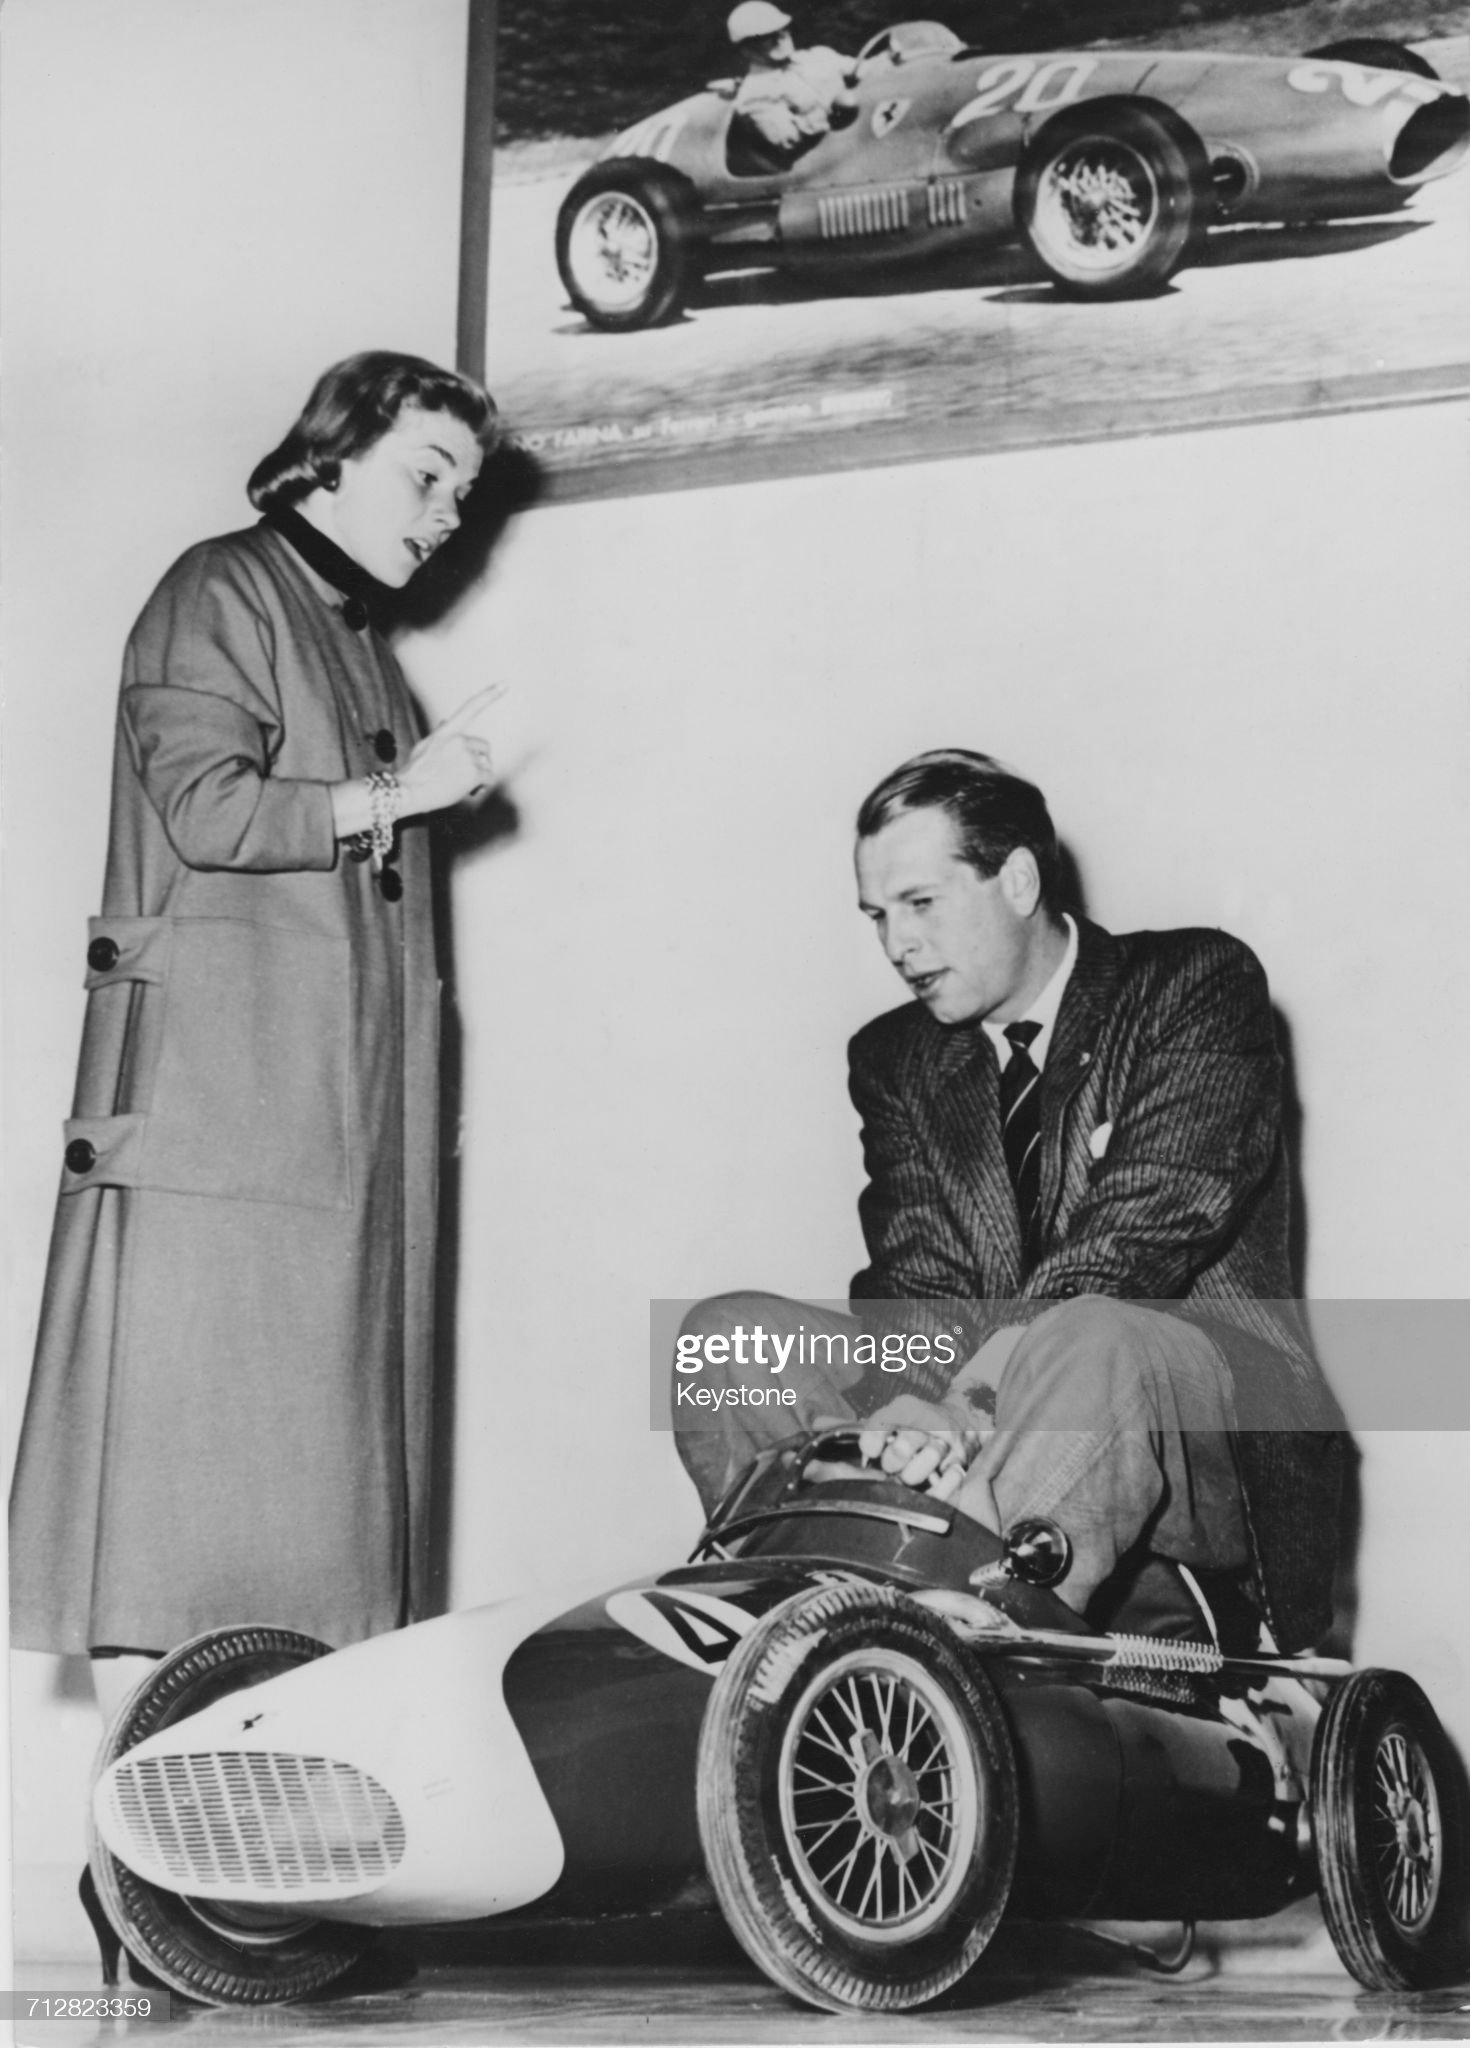 Peter Collins, team driver for the Scuderia Ferrari, plays on a toy replica Ferrari as his wife Louise King watches.